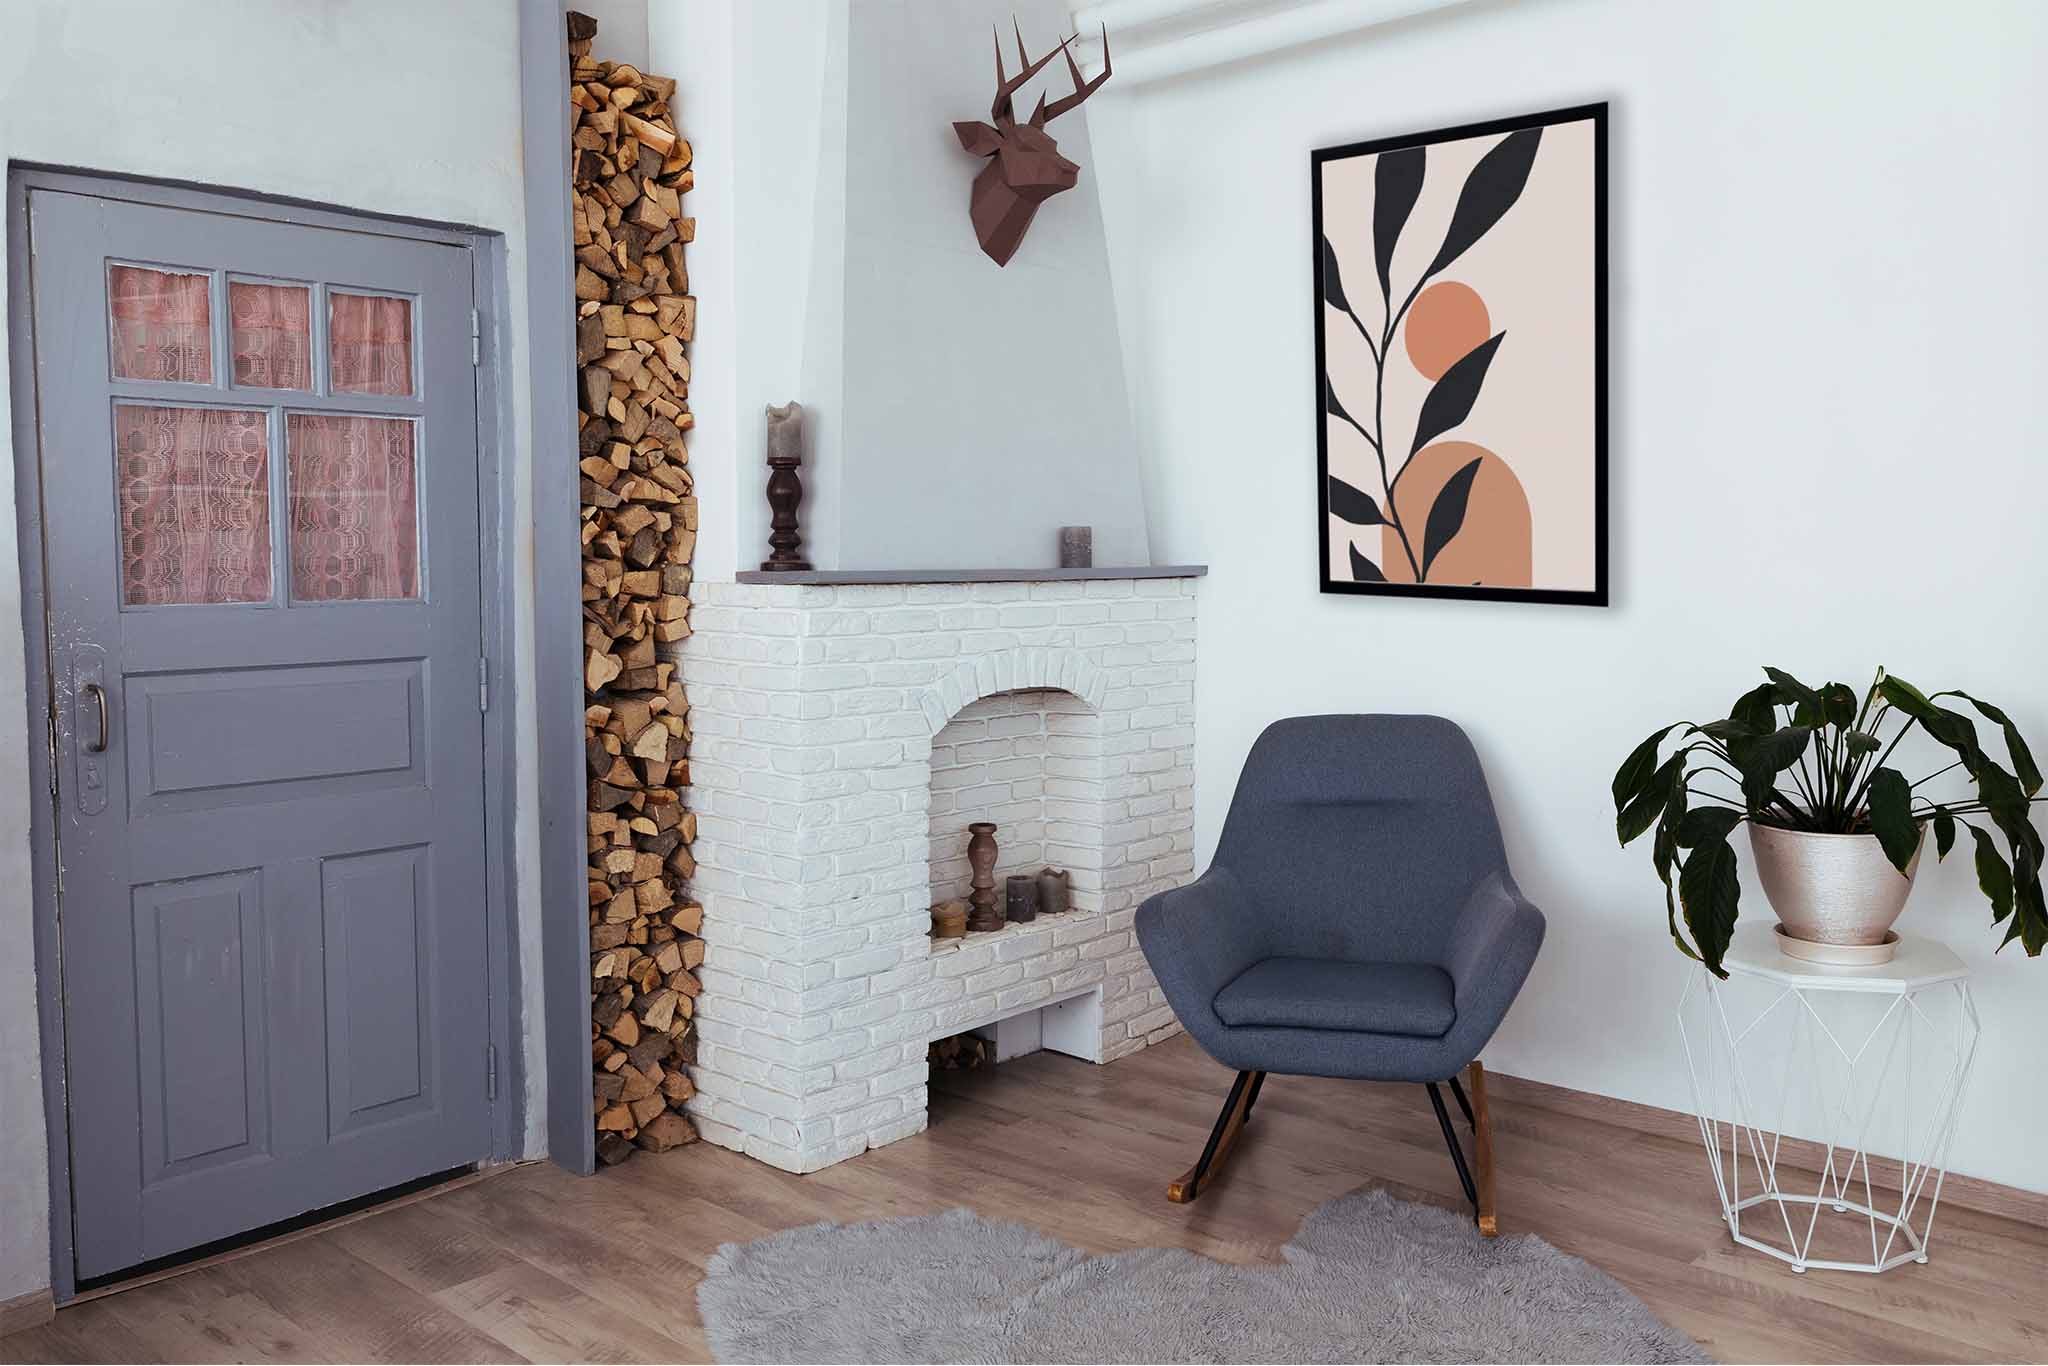 A Rustic Fireplace Gets an Elegant New Look